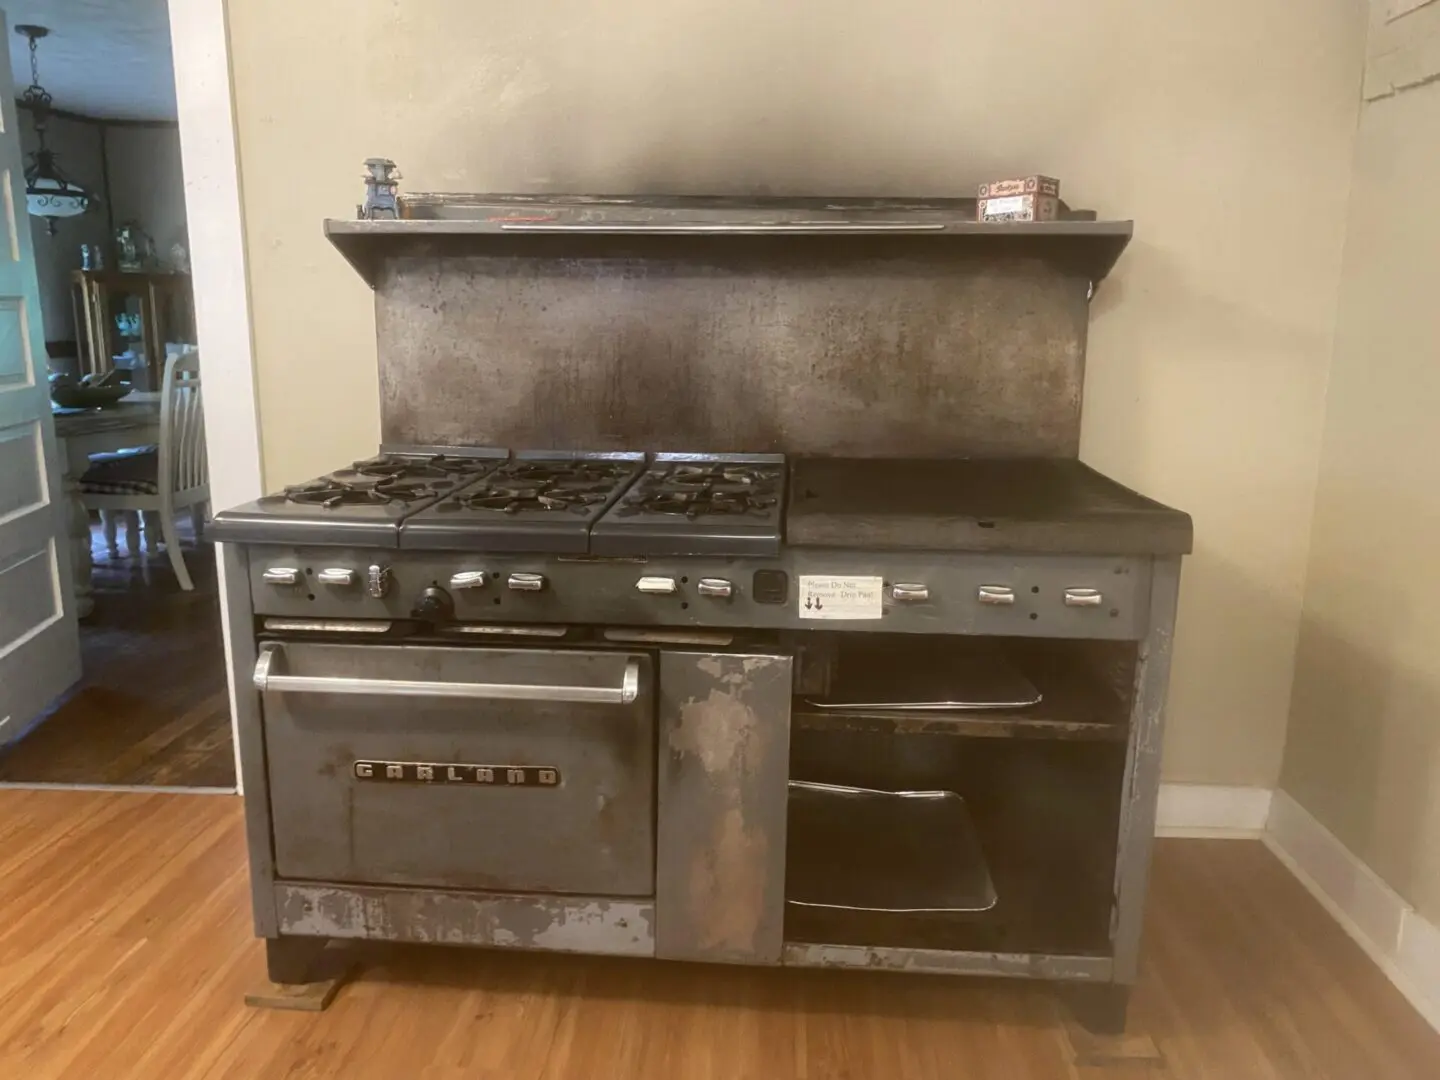 A large metal stove with two ovens and a shelf.